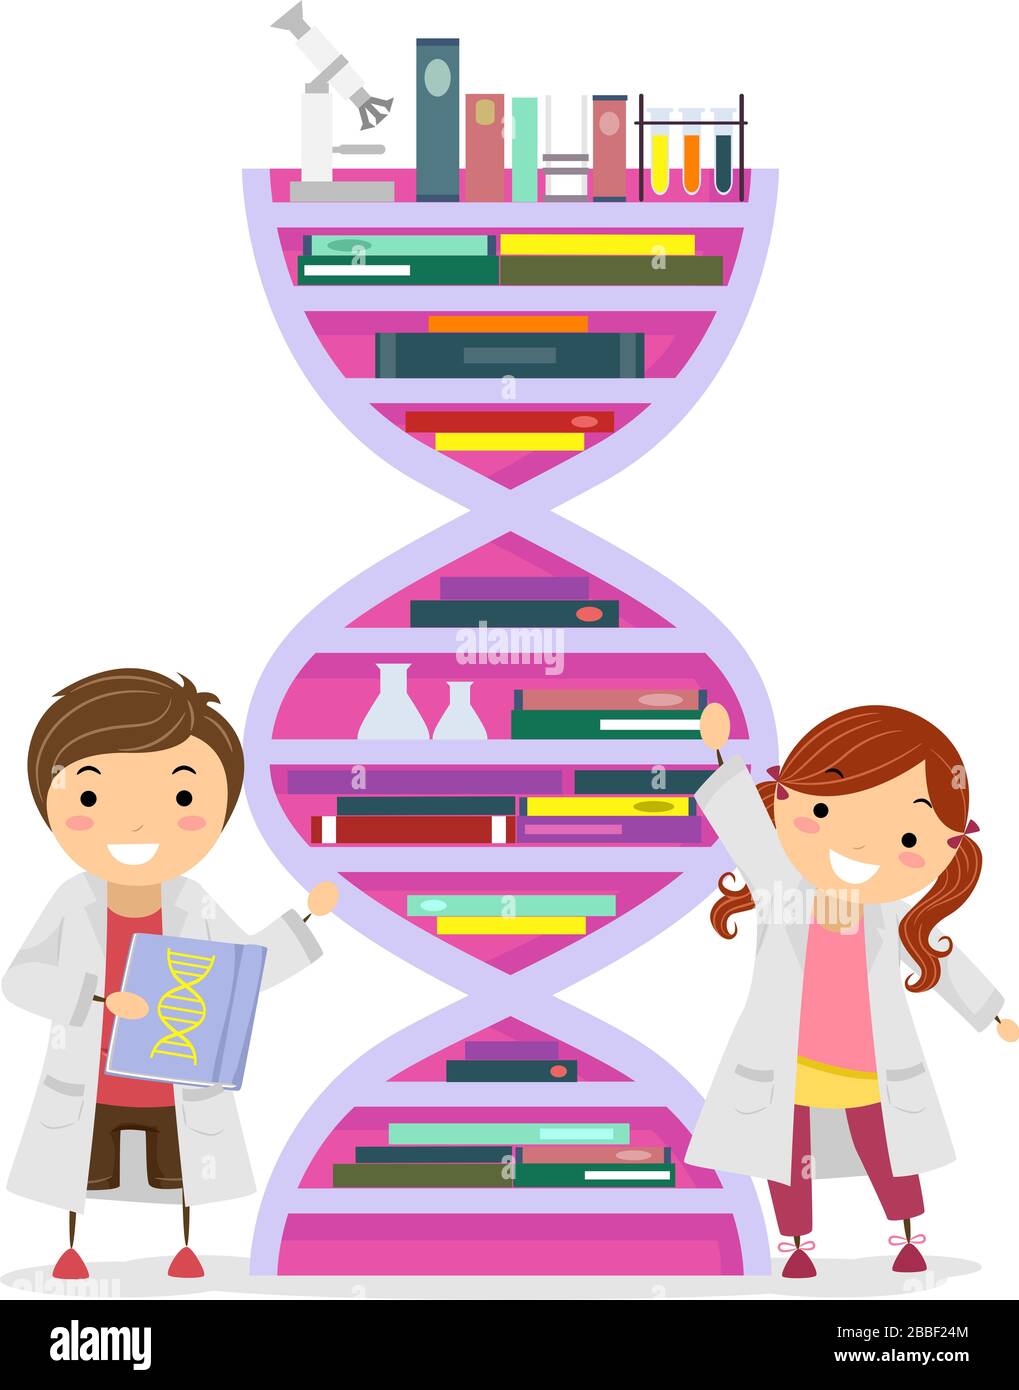 Illustration of Stickman Kids Wearing Lab Gowns and Showing DNA Shaped Bookshelf Full of Books and Chemistry Items Like Flasks, Test Tubes and Microsc Stock Photo